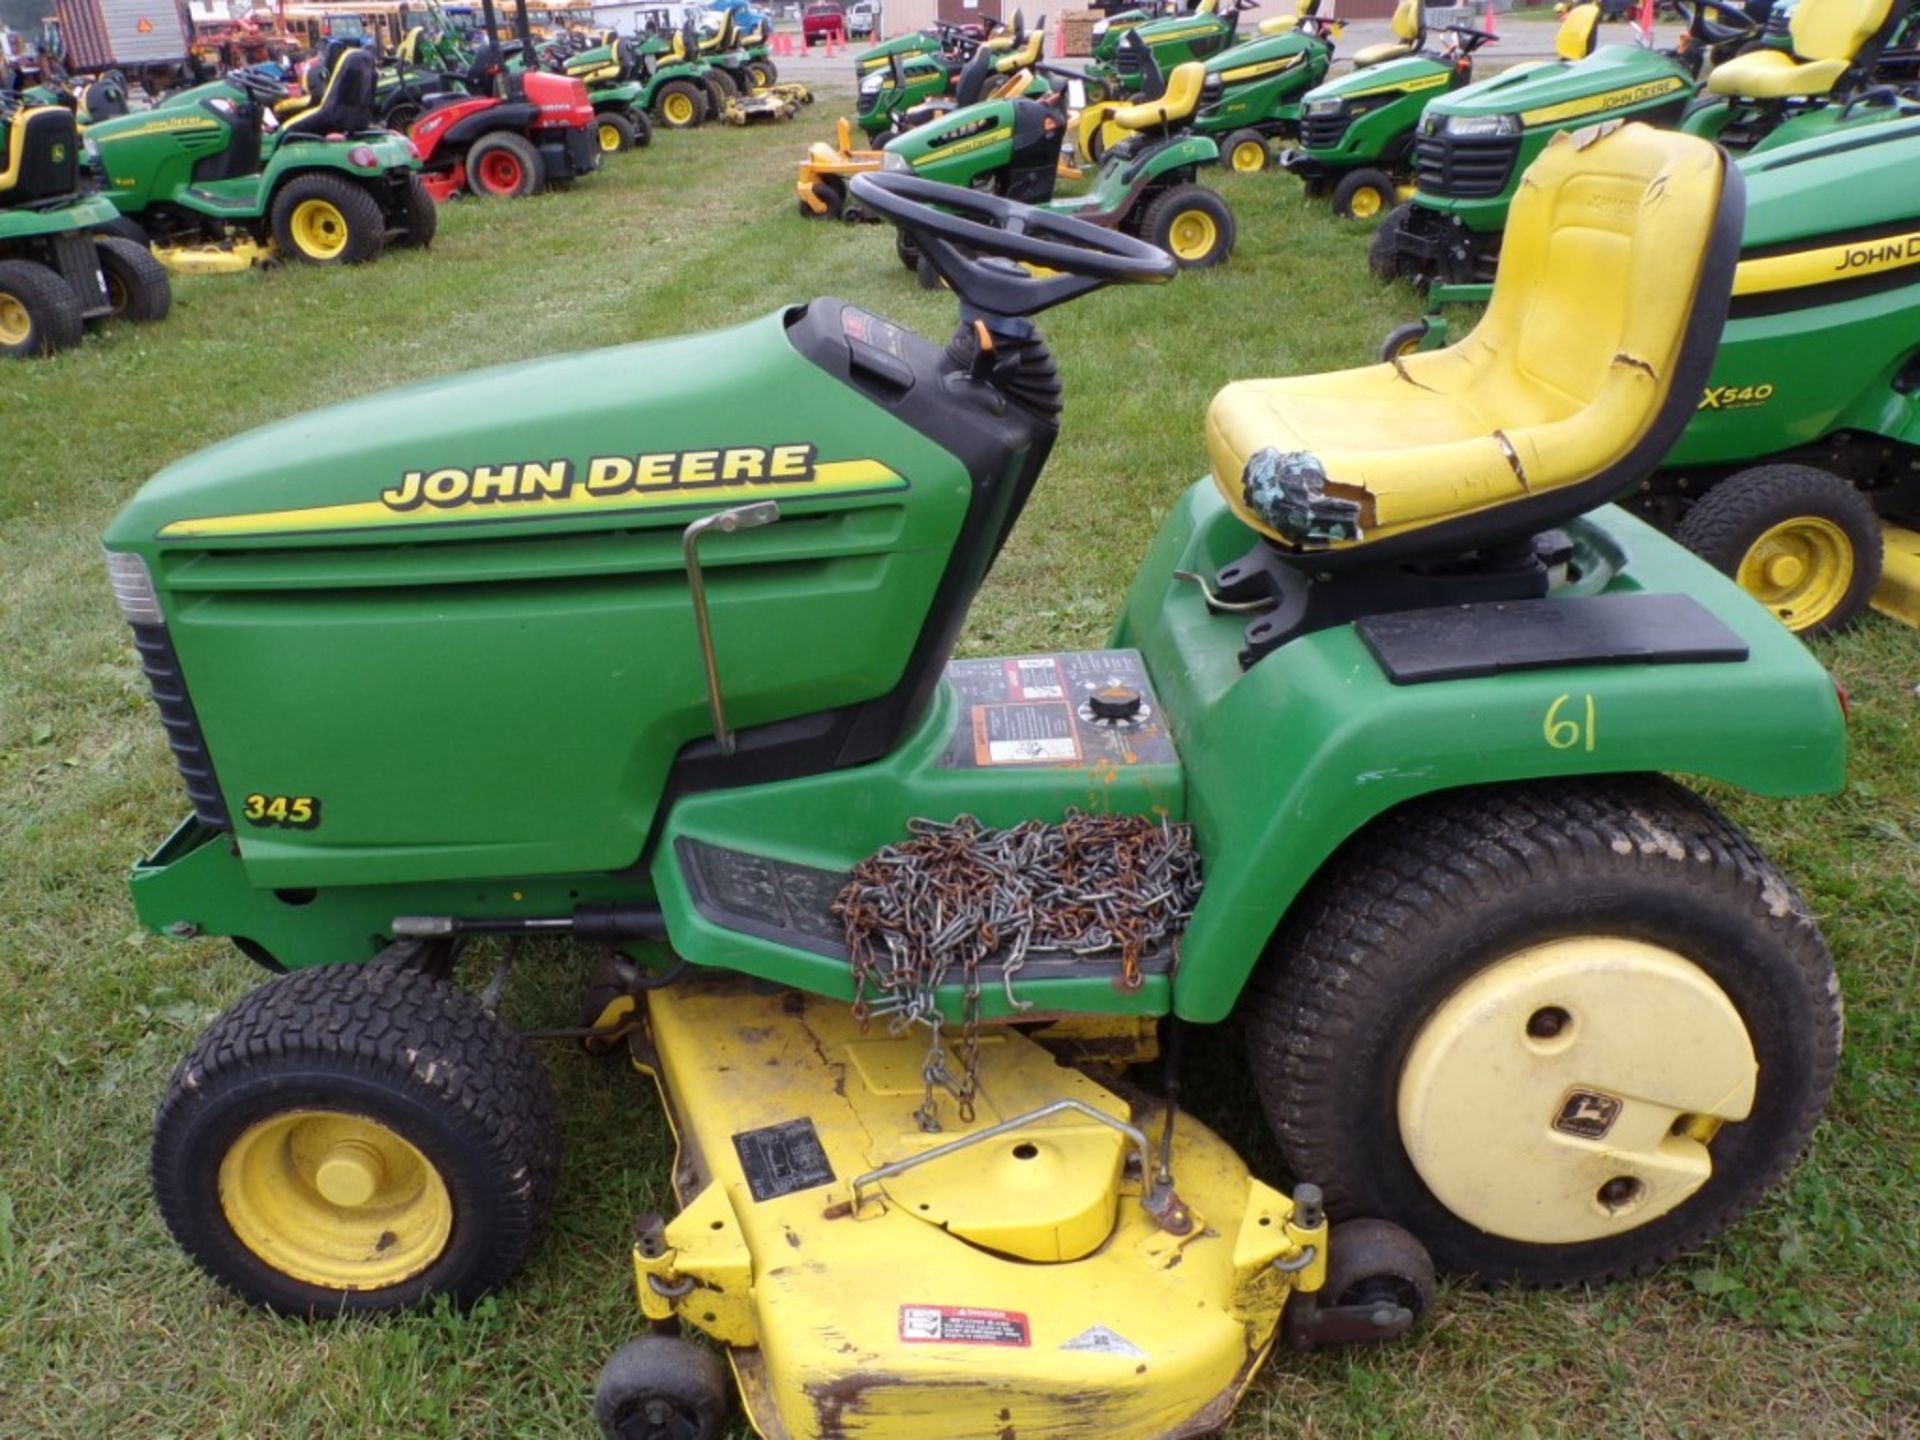 John Deere 345 Riding Mower w/54'' Deck, 20 HP Liquid Cooled Engine, Has Rear Wheel Weights And Tire